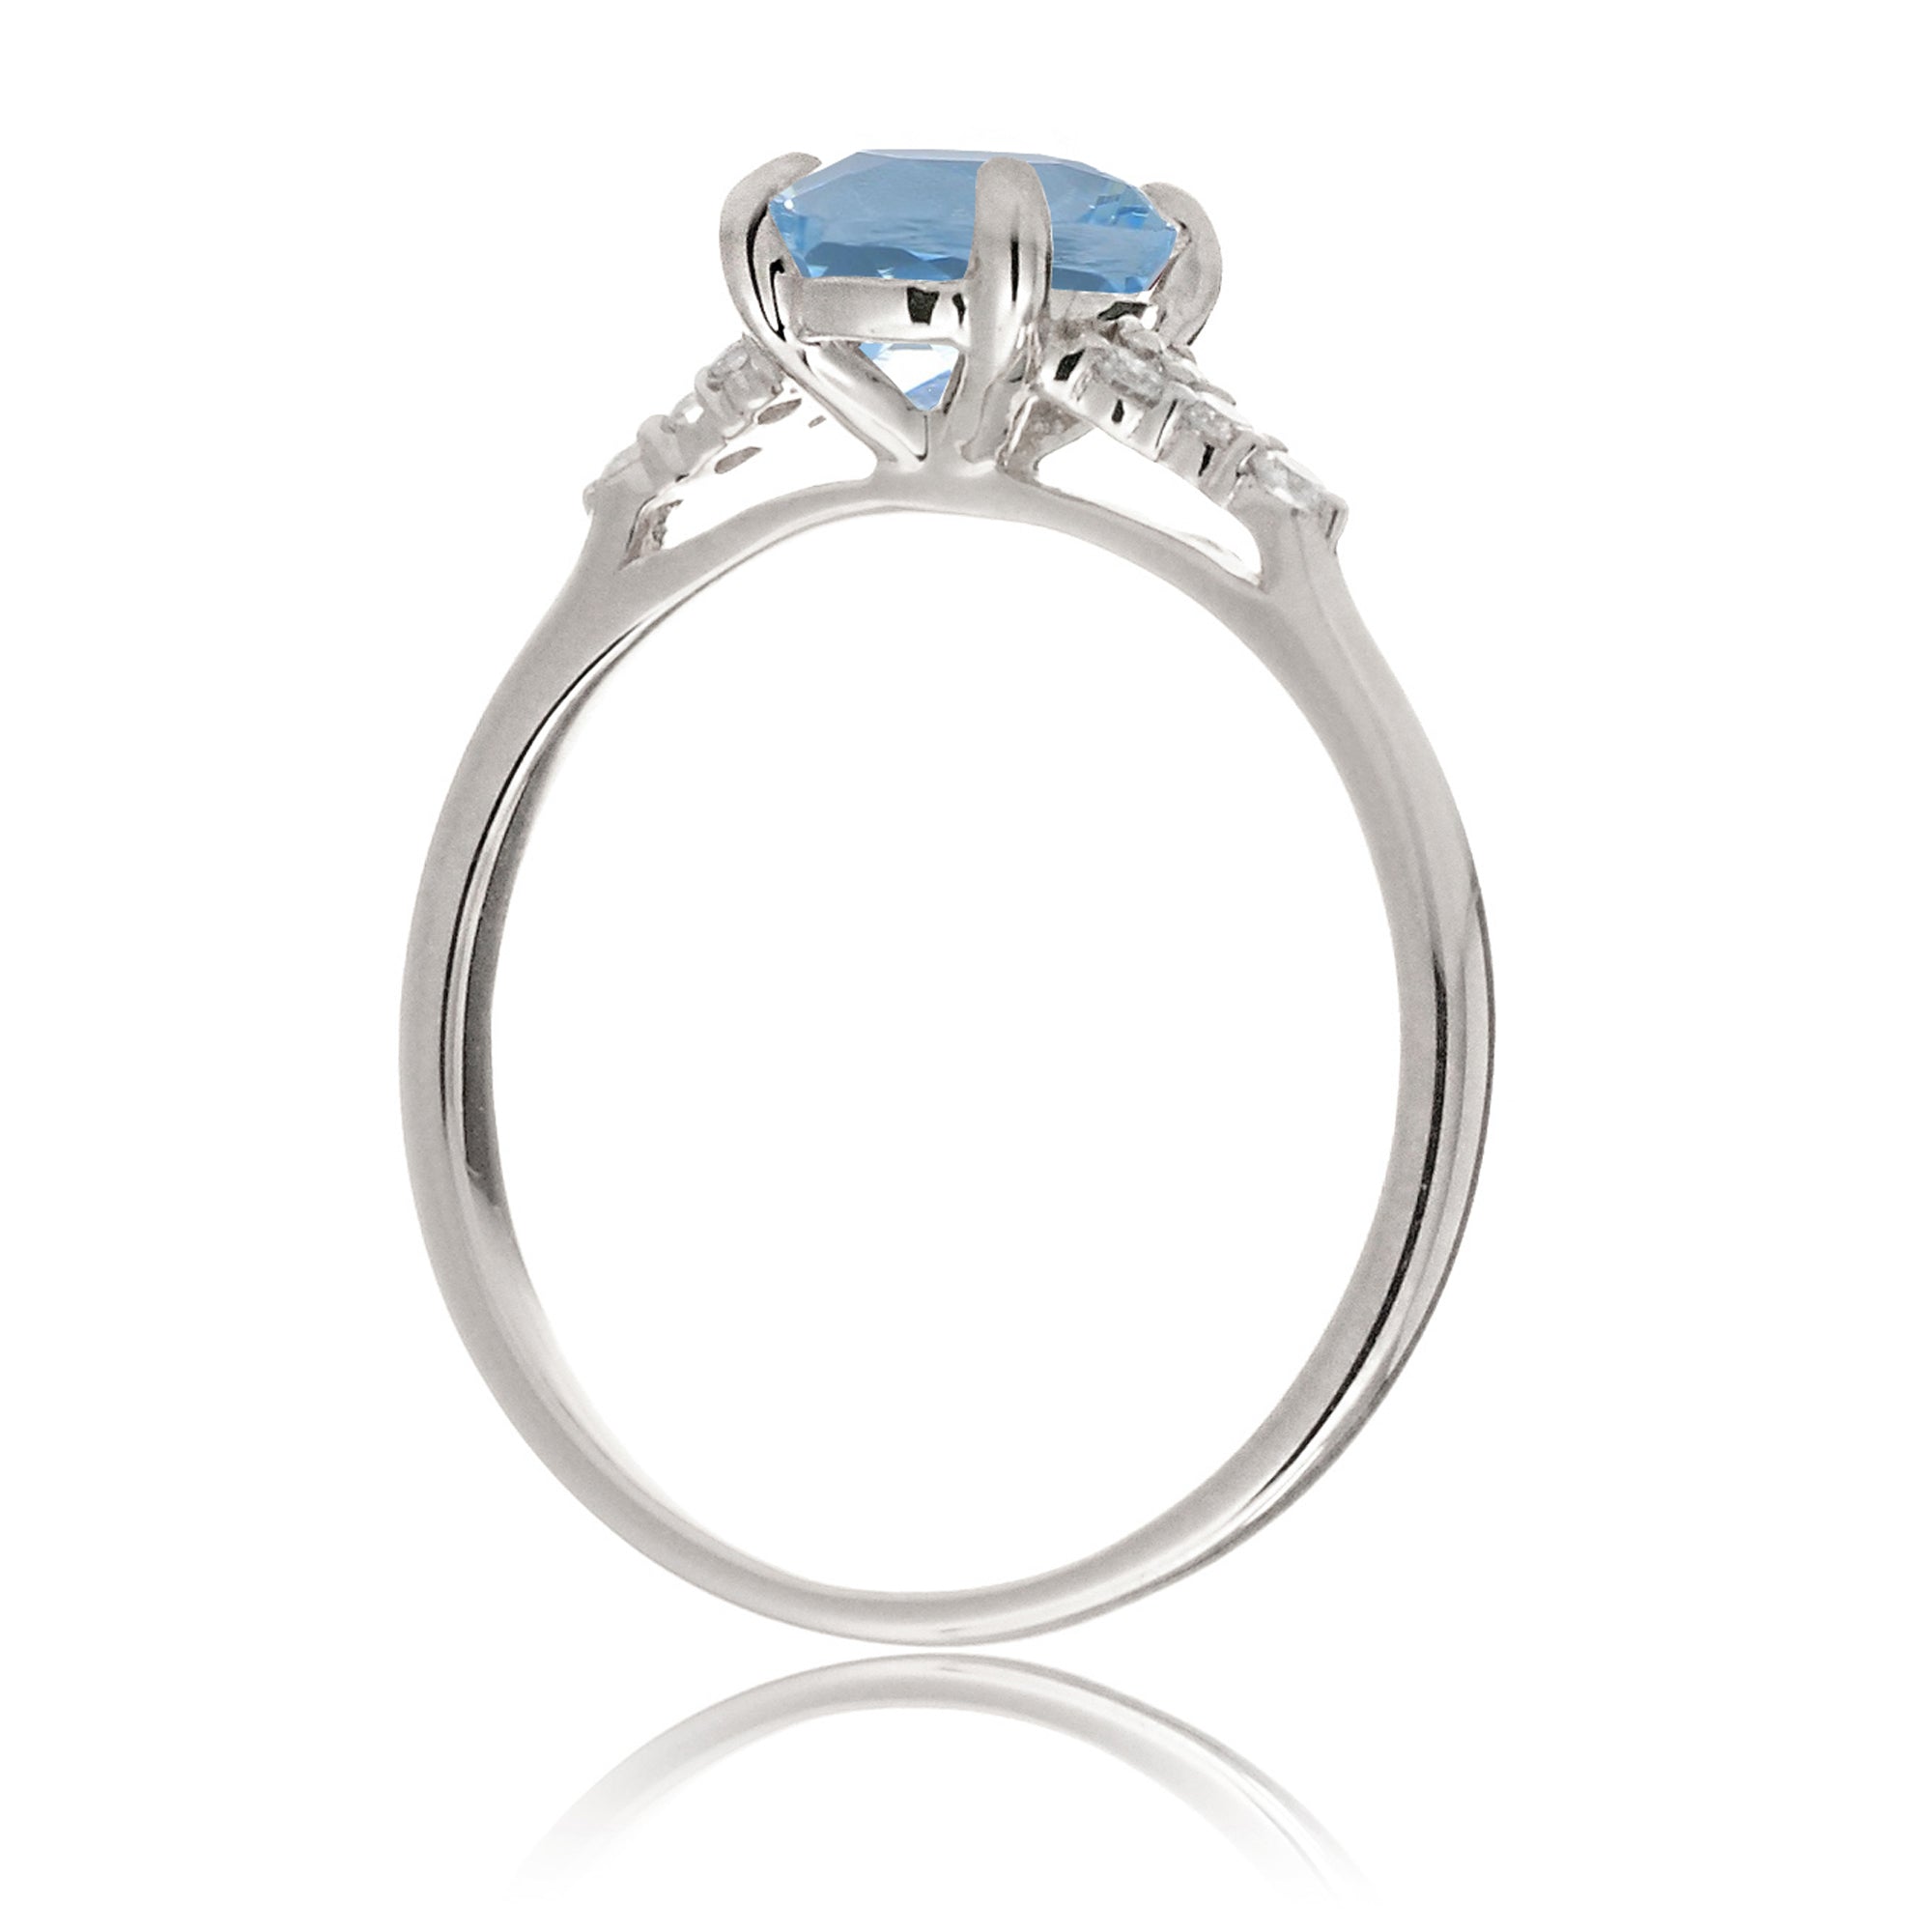 Pear cut natural aquamarine and diamond engagement ring in white gold - the Chloe